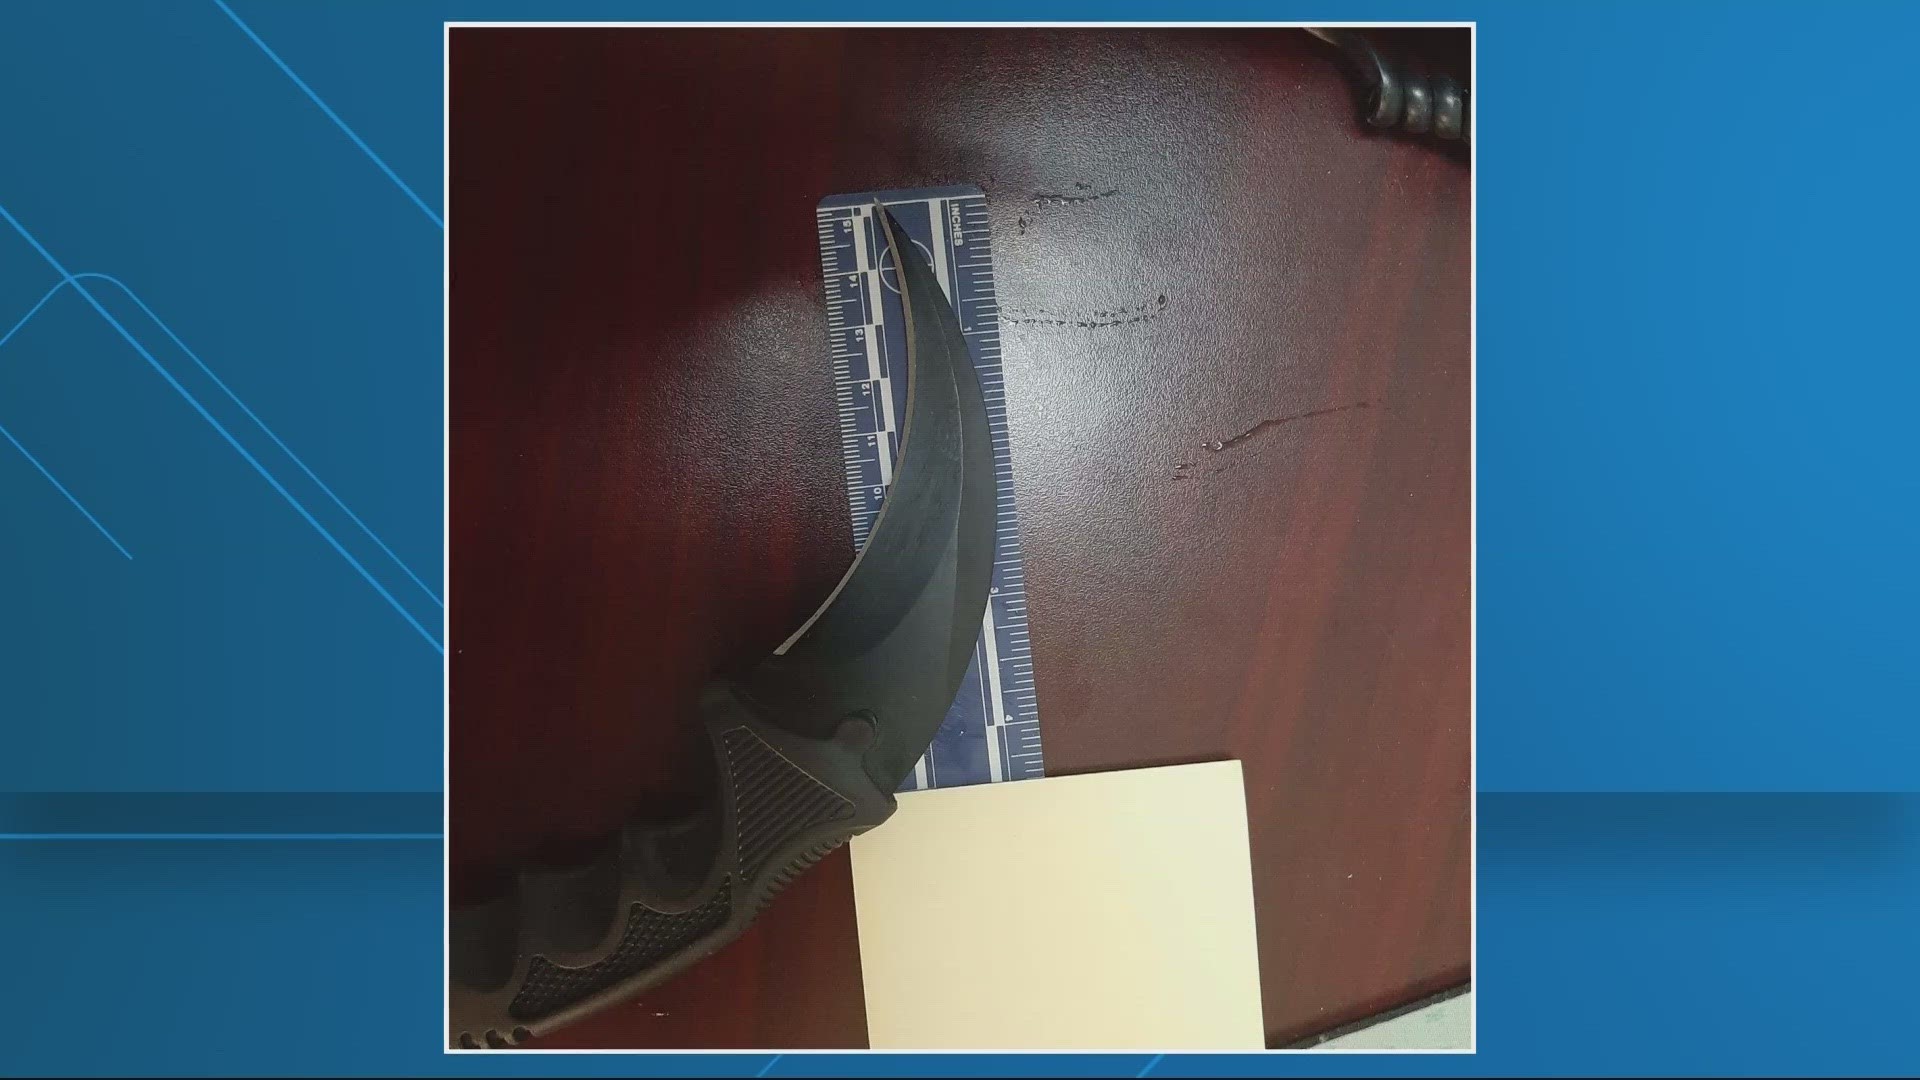 Some of the confiscated items include large knifes.